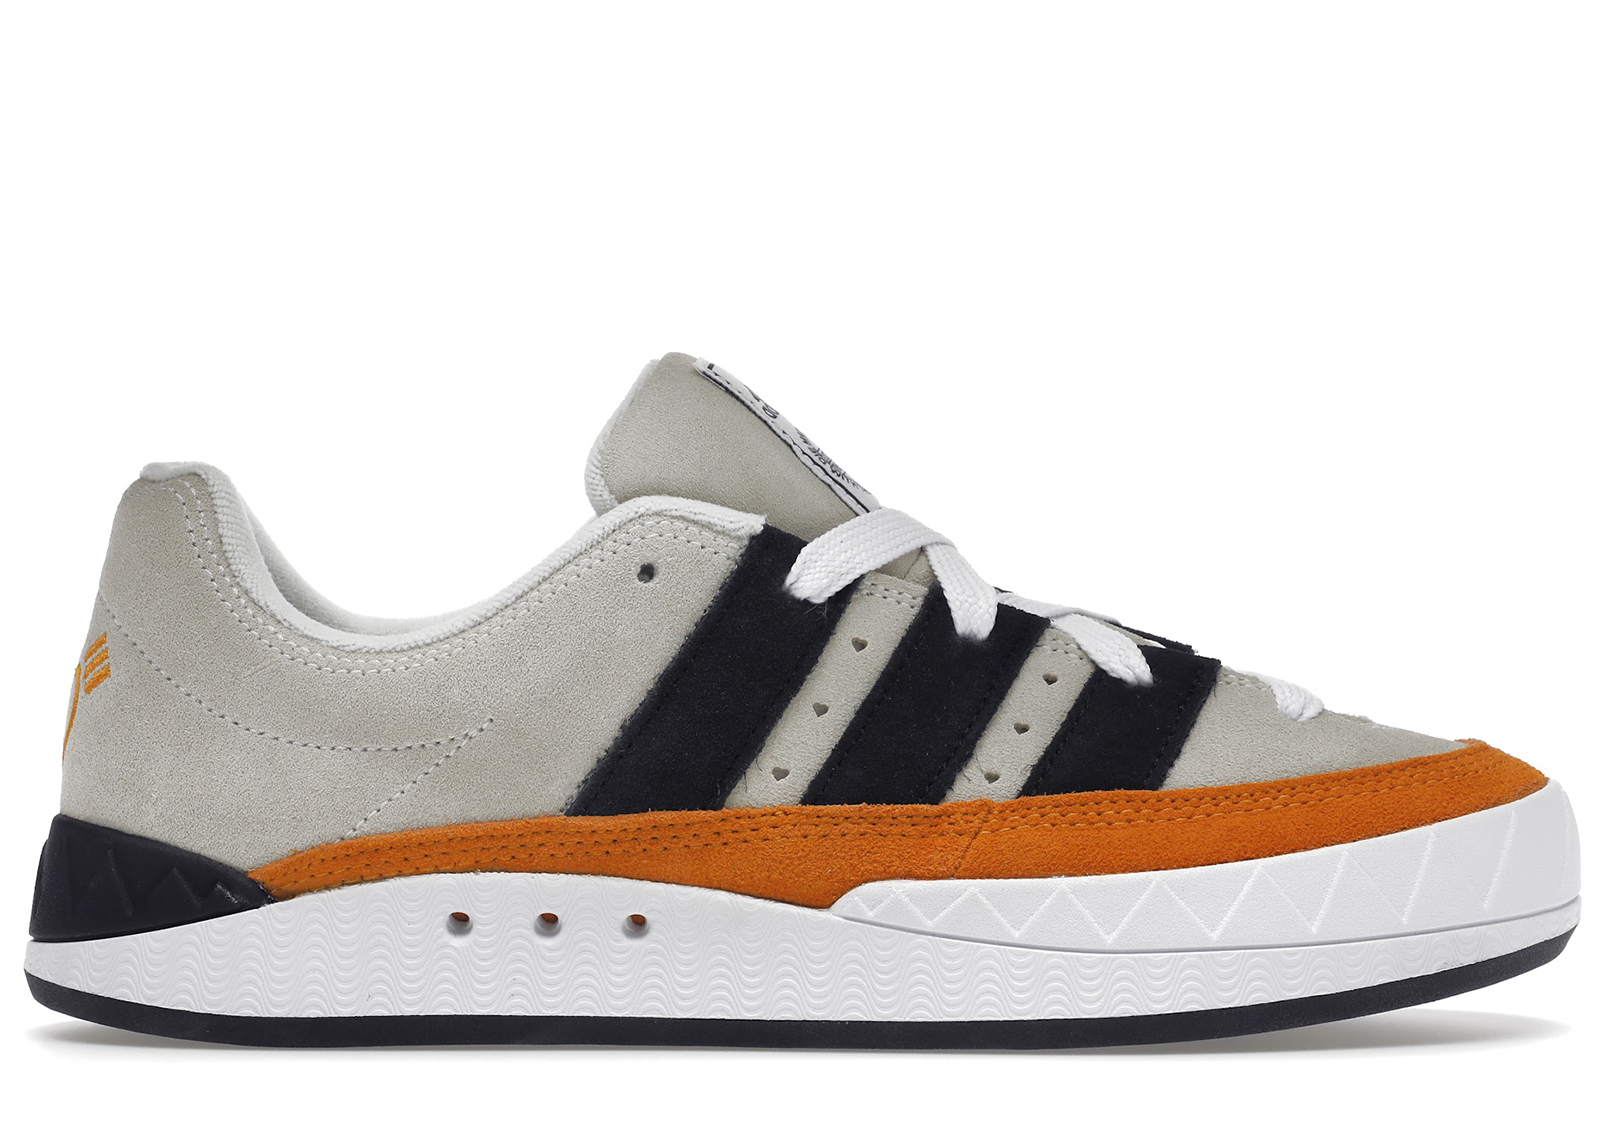 Buy adidas Skateboarding Size 8 Shoes & New Sneakers - StockX